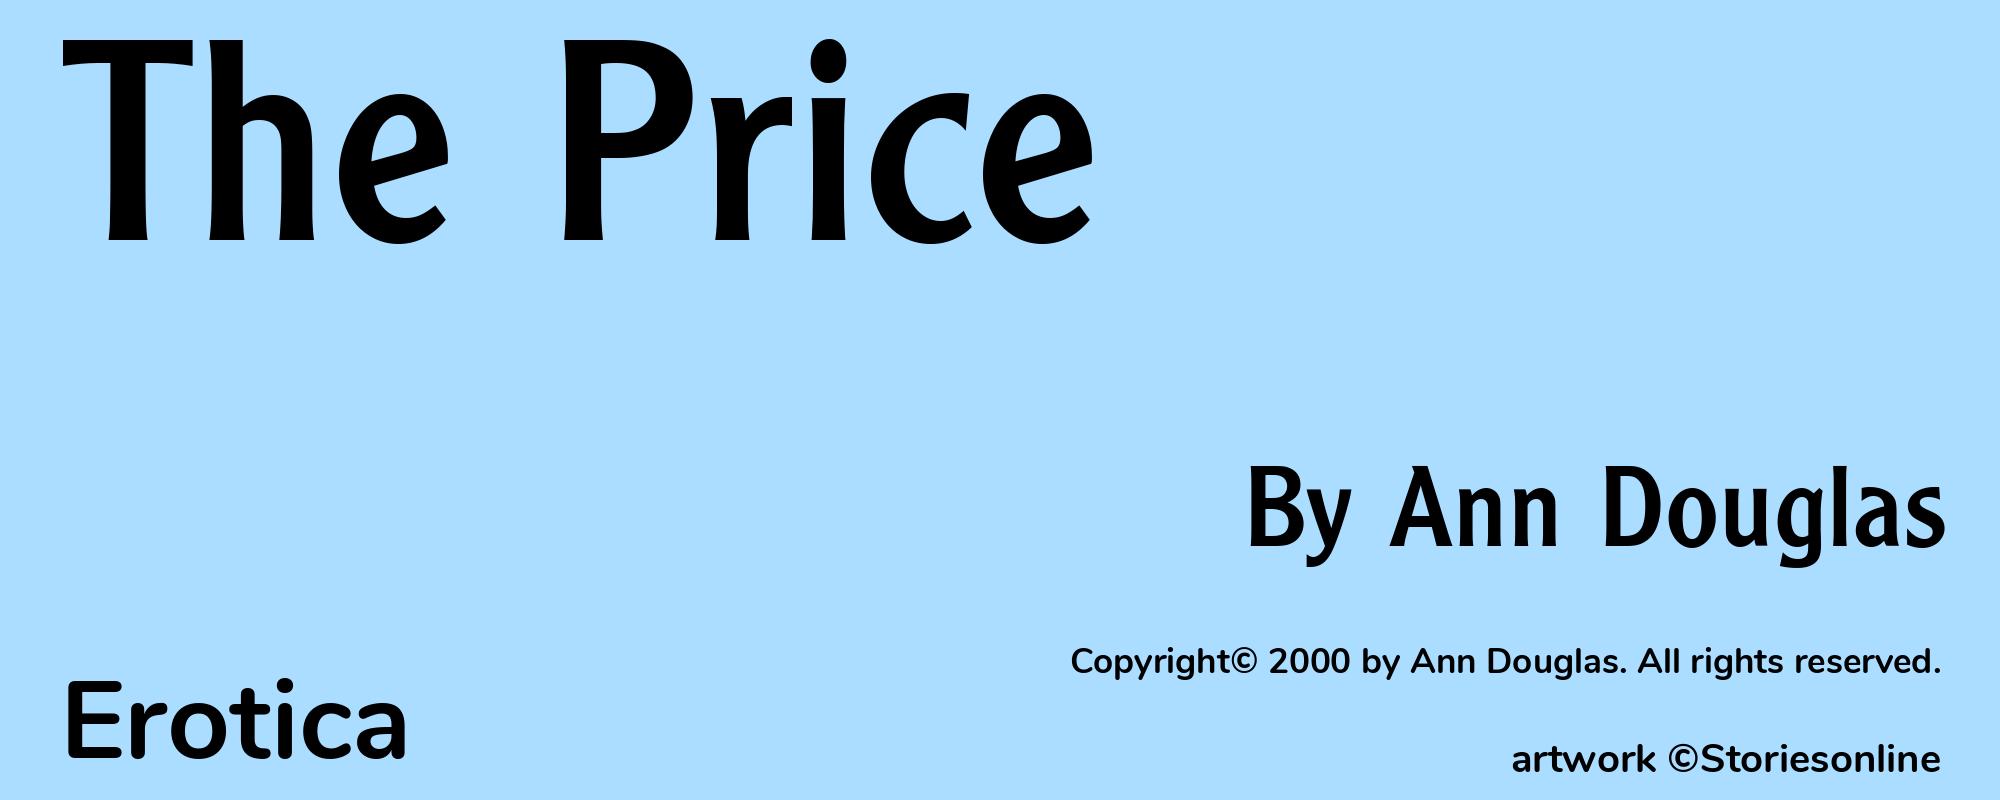 The Price - Cover